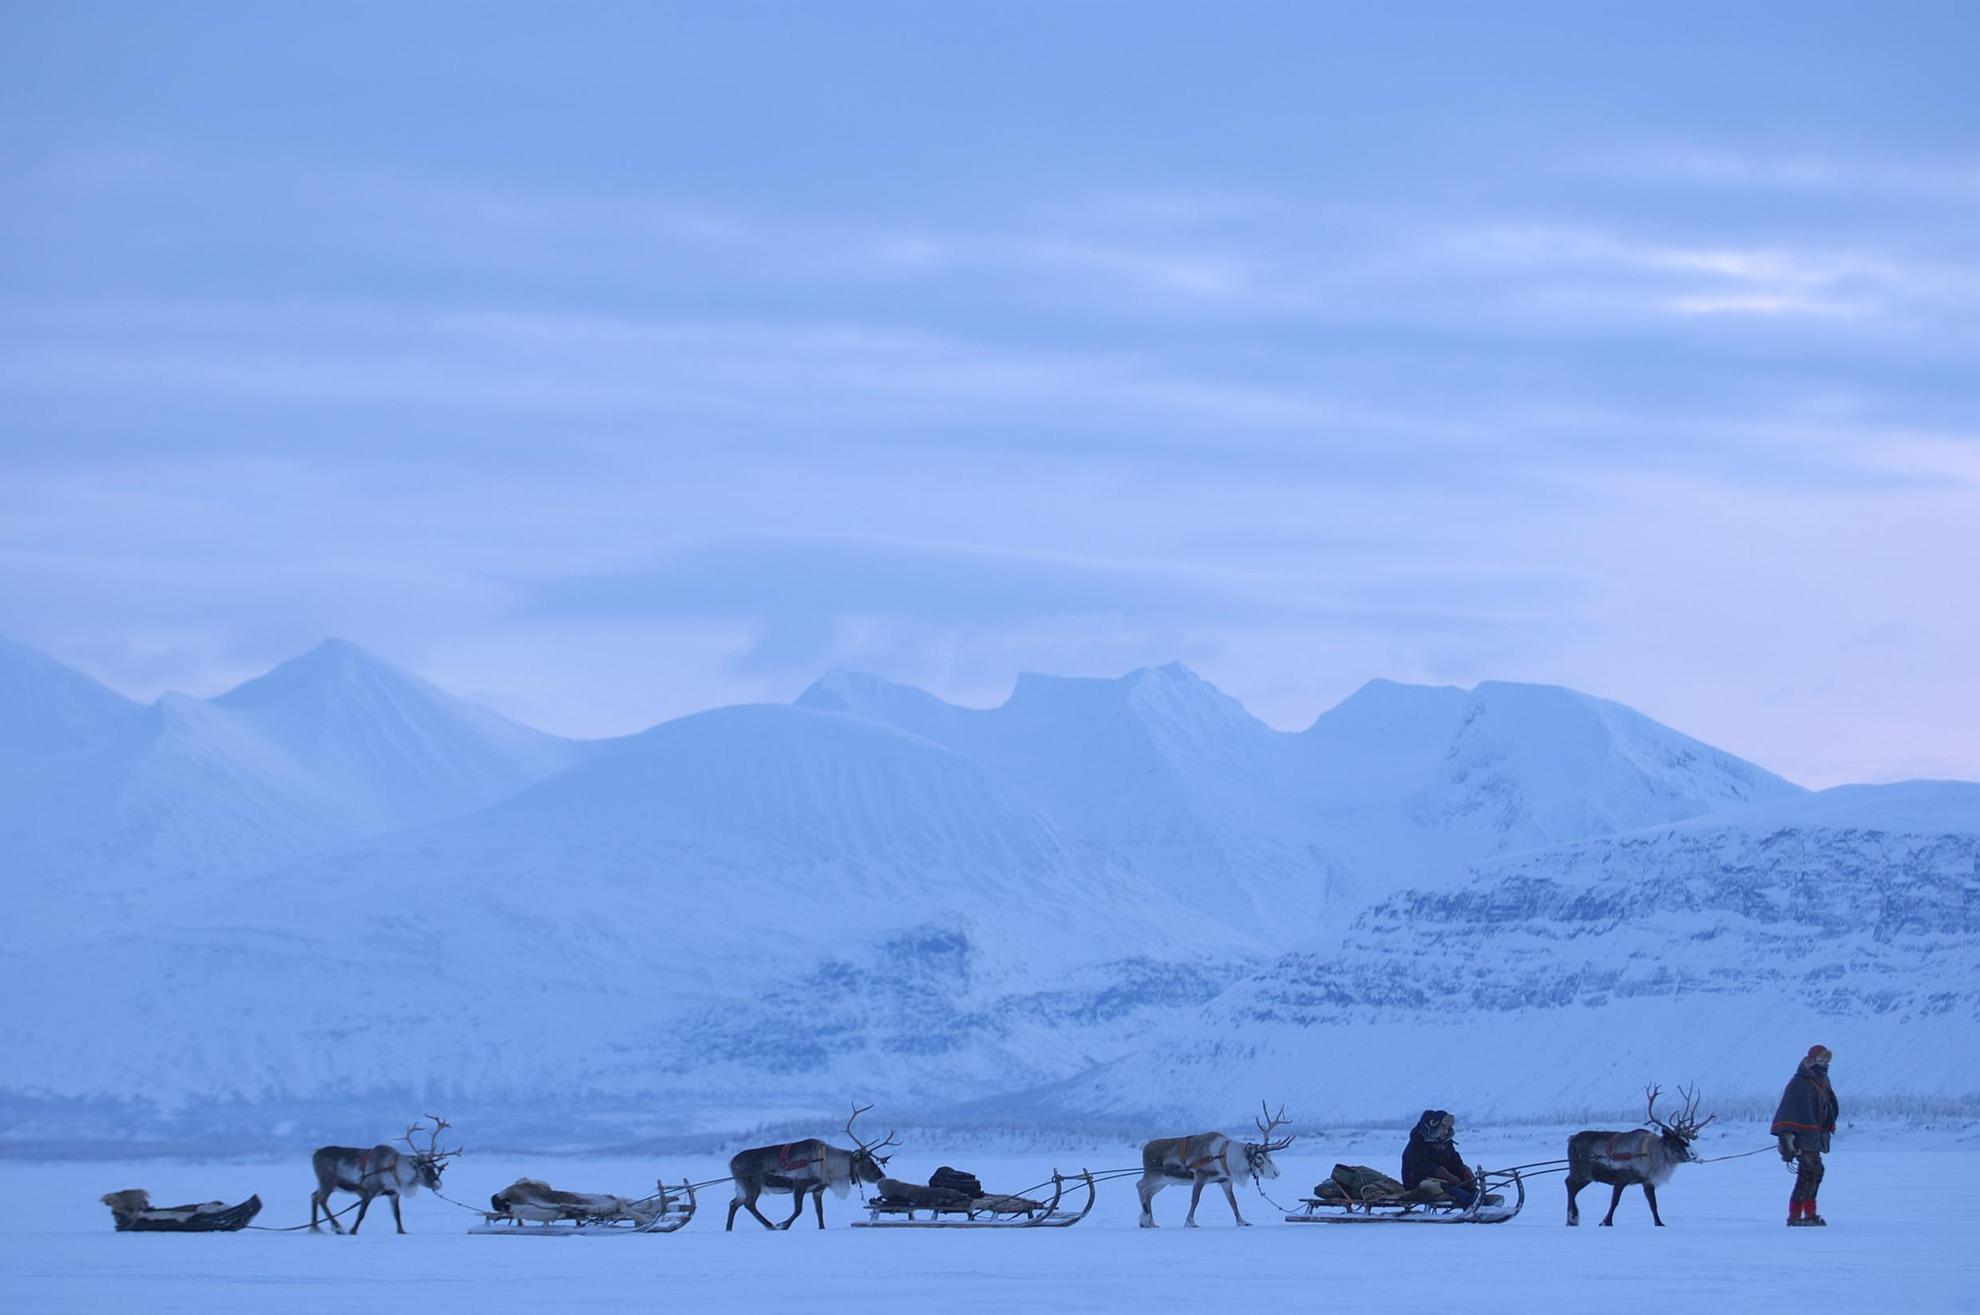 A man is leading a number of reindeer with sleds through a winter landscape of snow and ice.